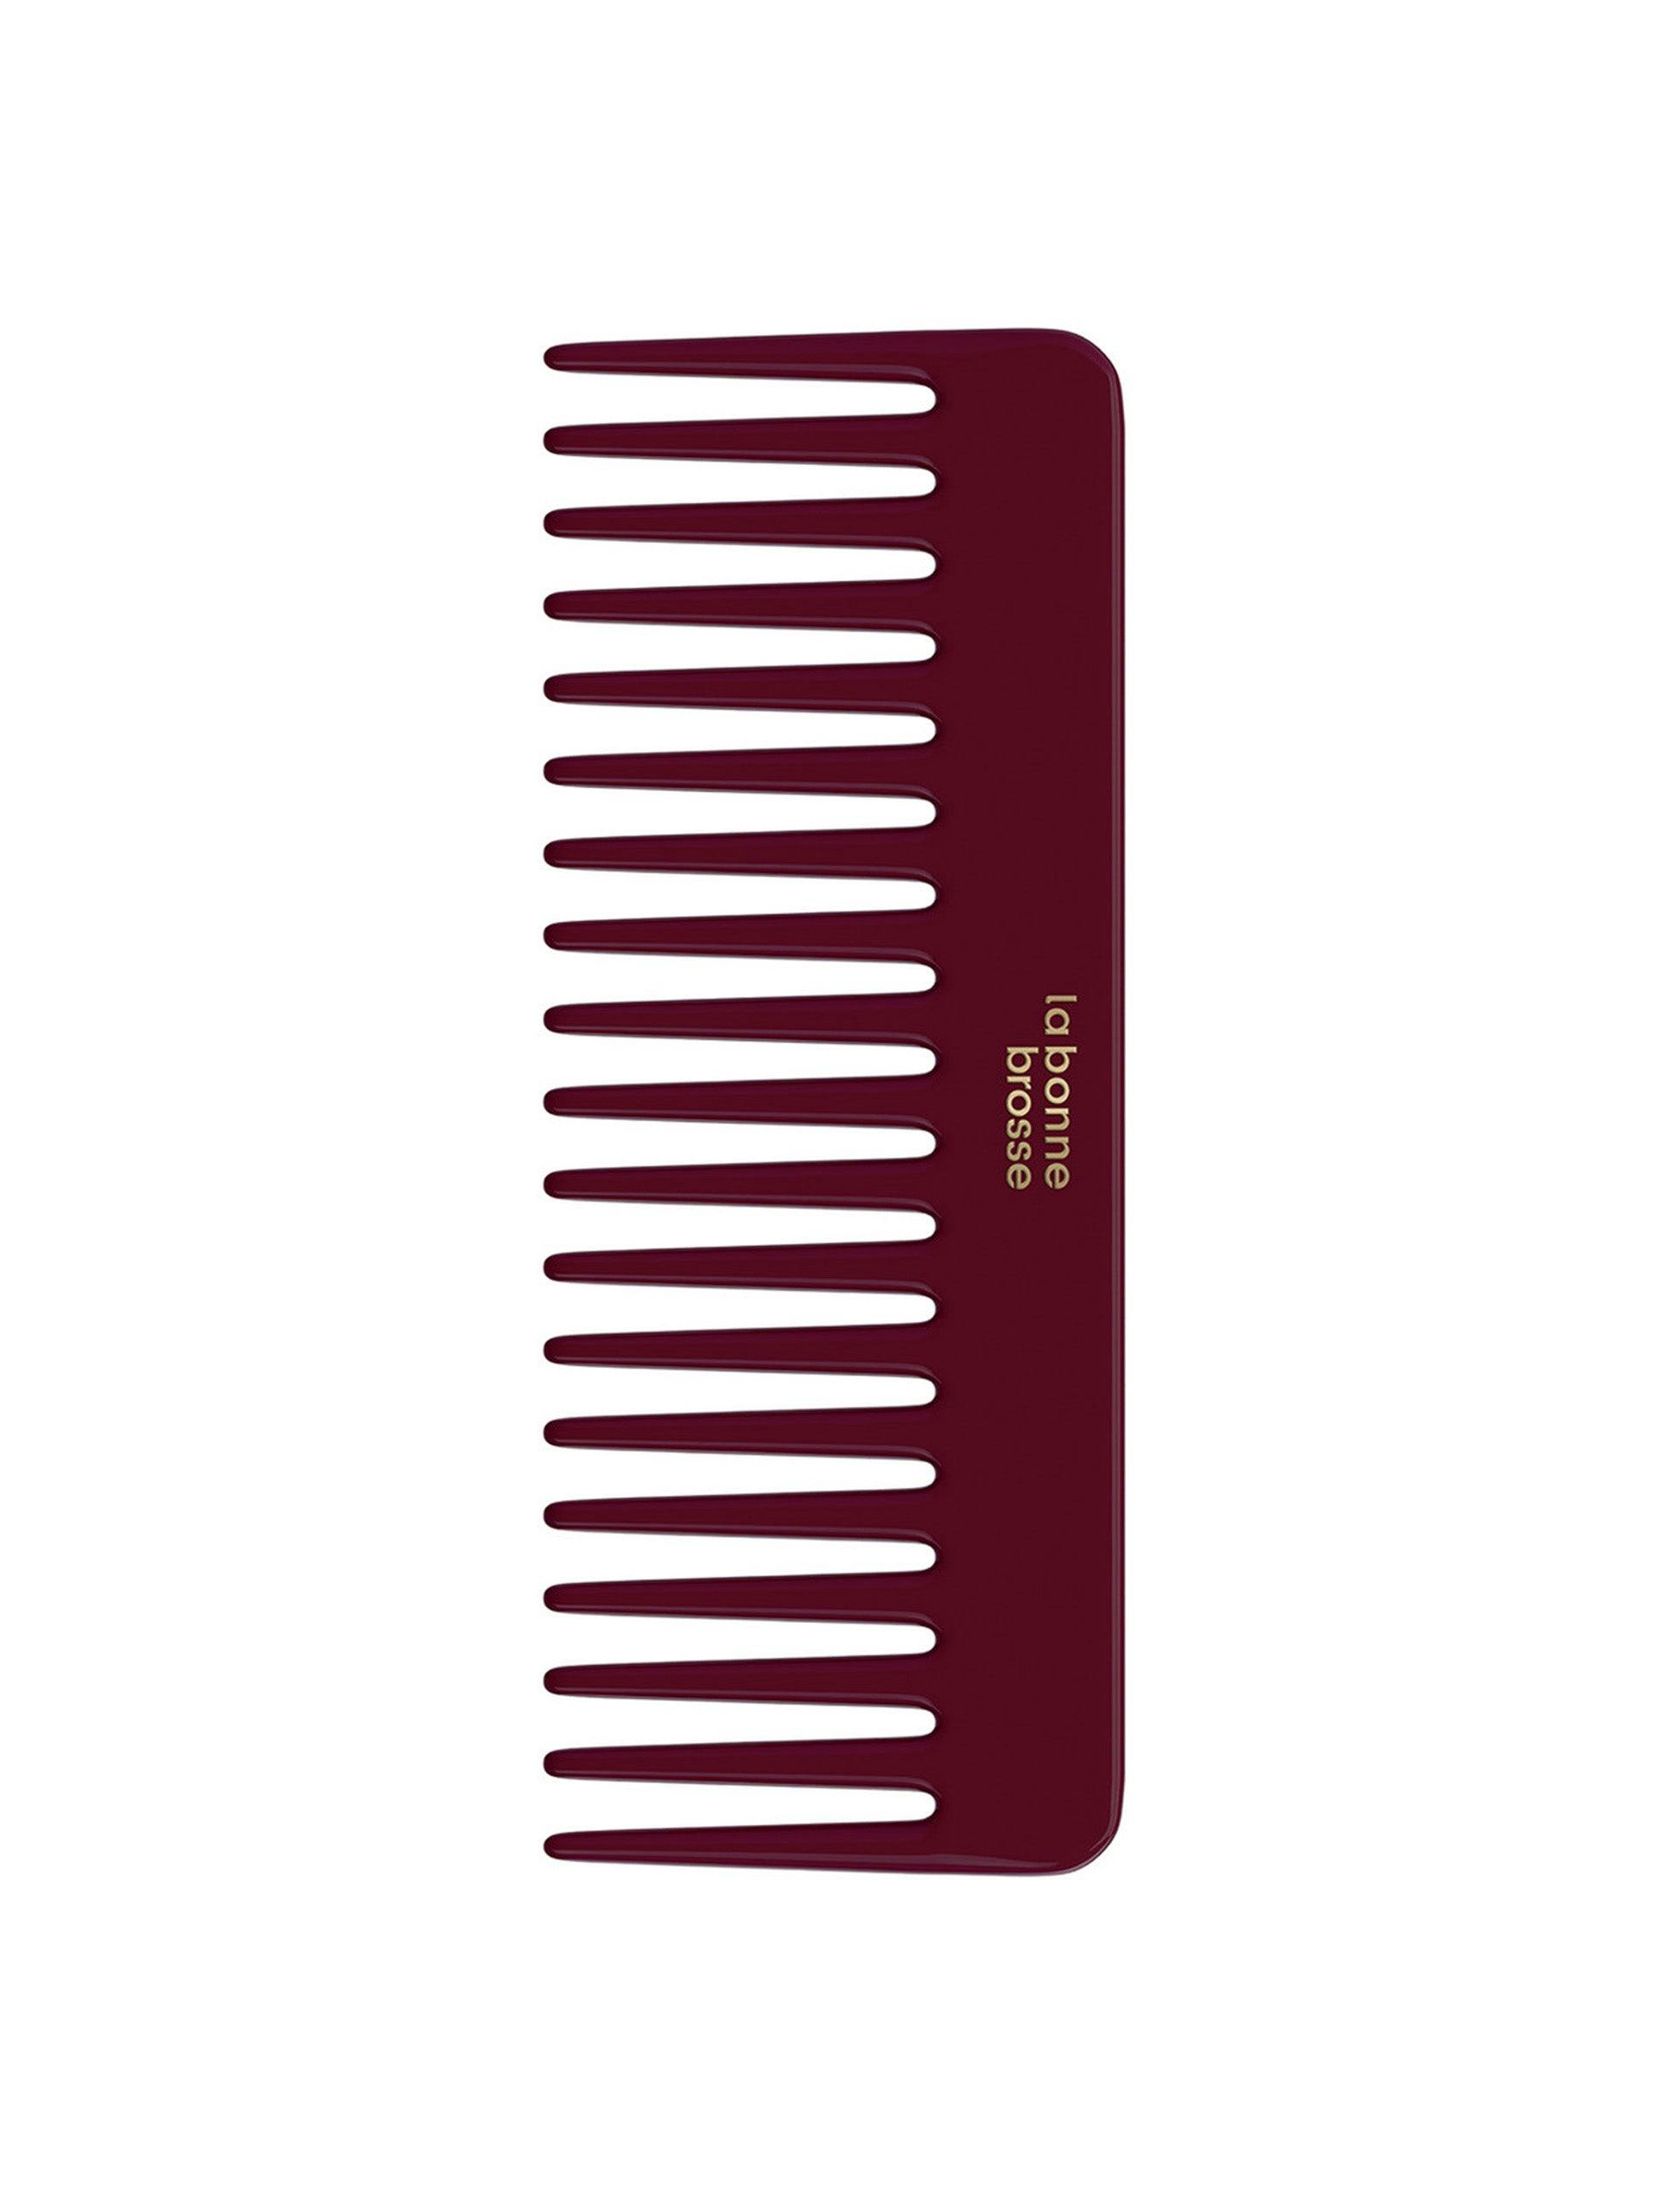 The cherry red acetate detangling comb